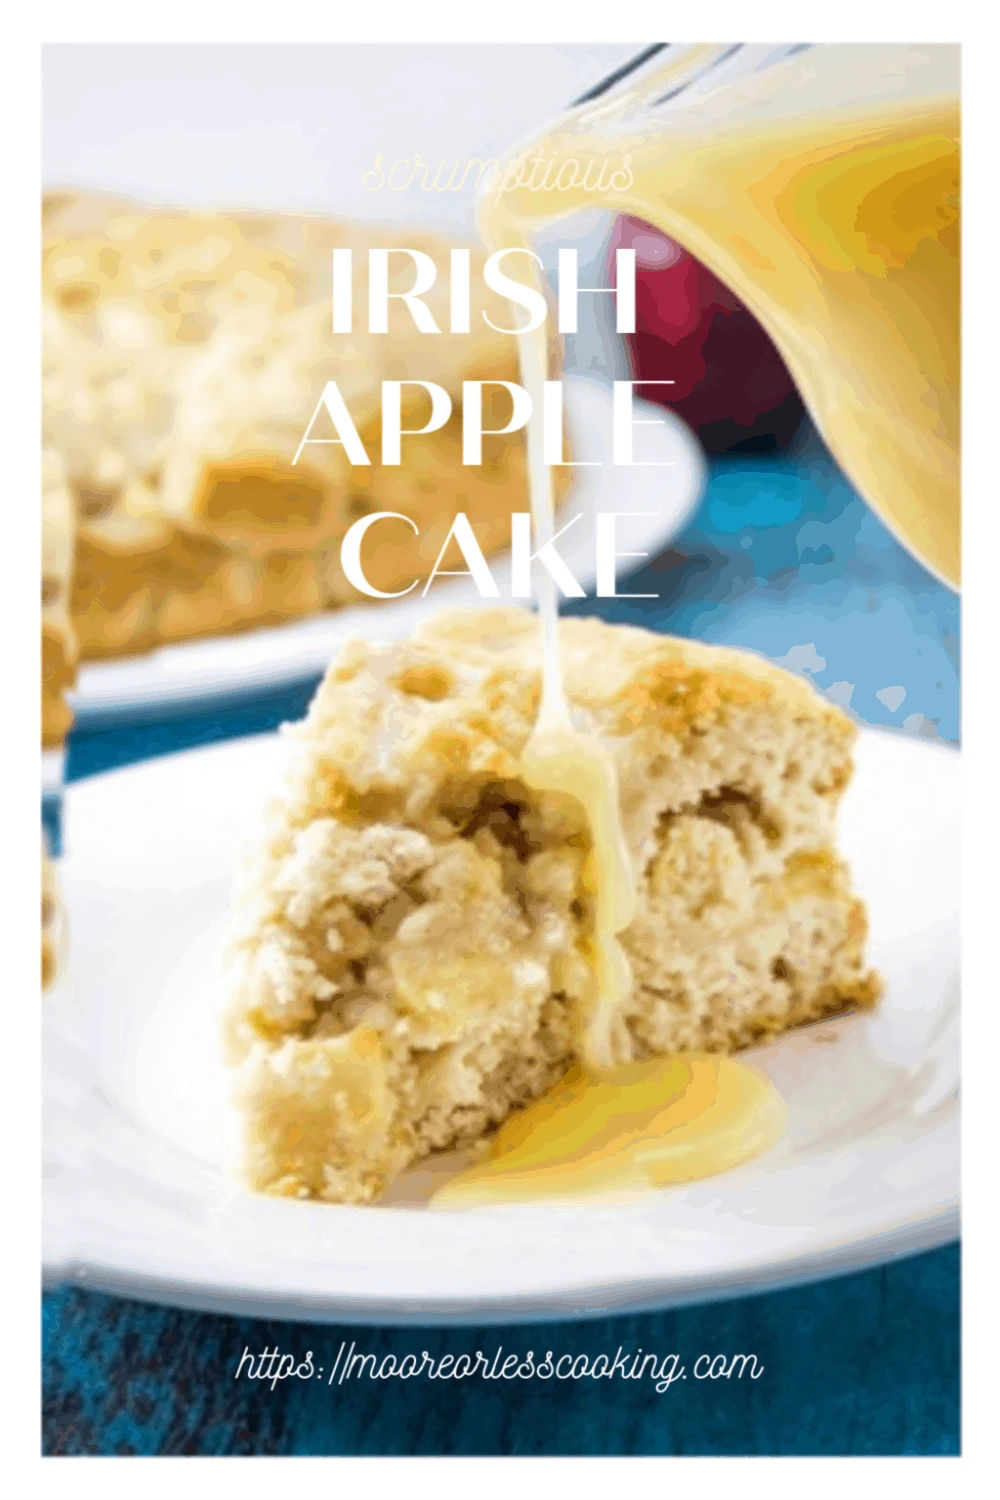 Irish Apple Cake is a deliciously moist cake with a surprise crunchy top and a rich whiskey cream sauce drizzled all over. #Irish #Irishapplecake #applecake #whiskeycreamsauce #food #recipes #dessert #mooreorlesscooking via @Mooreorlesscook